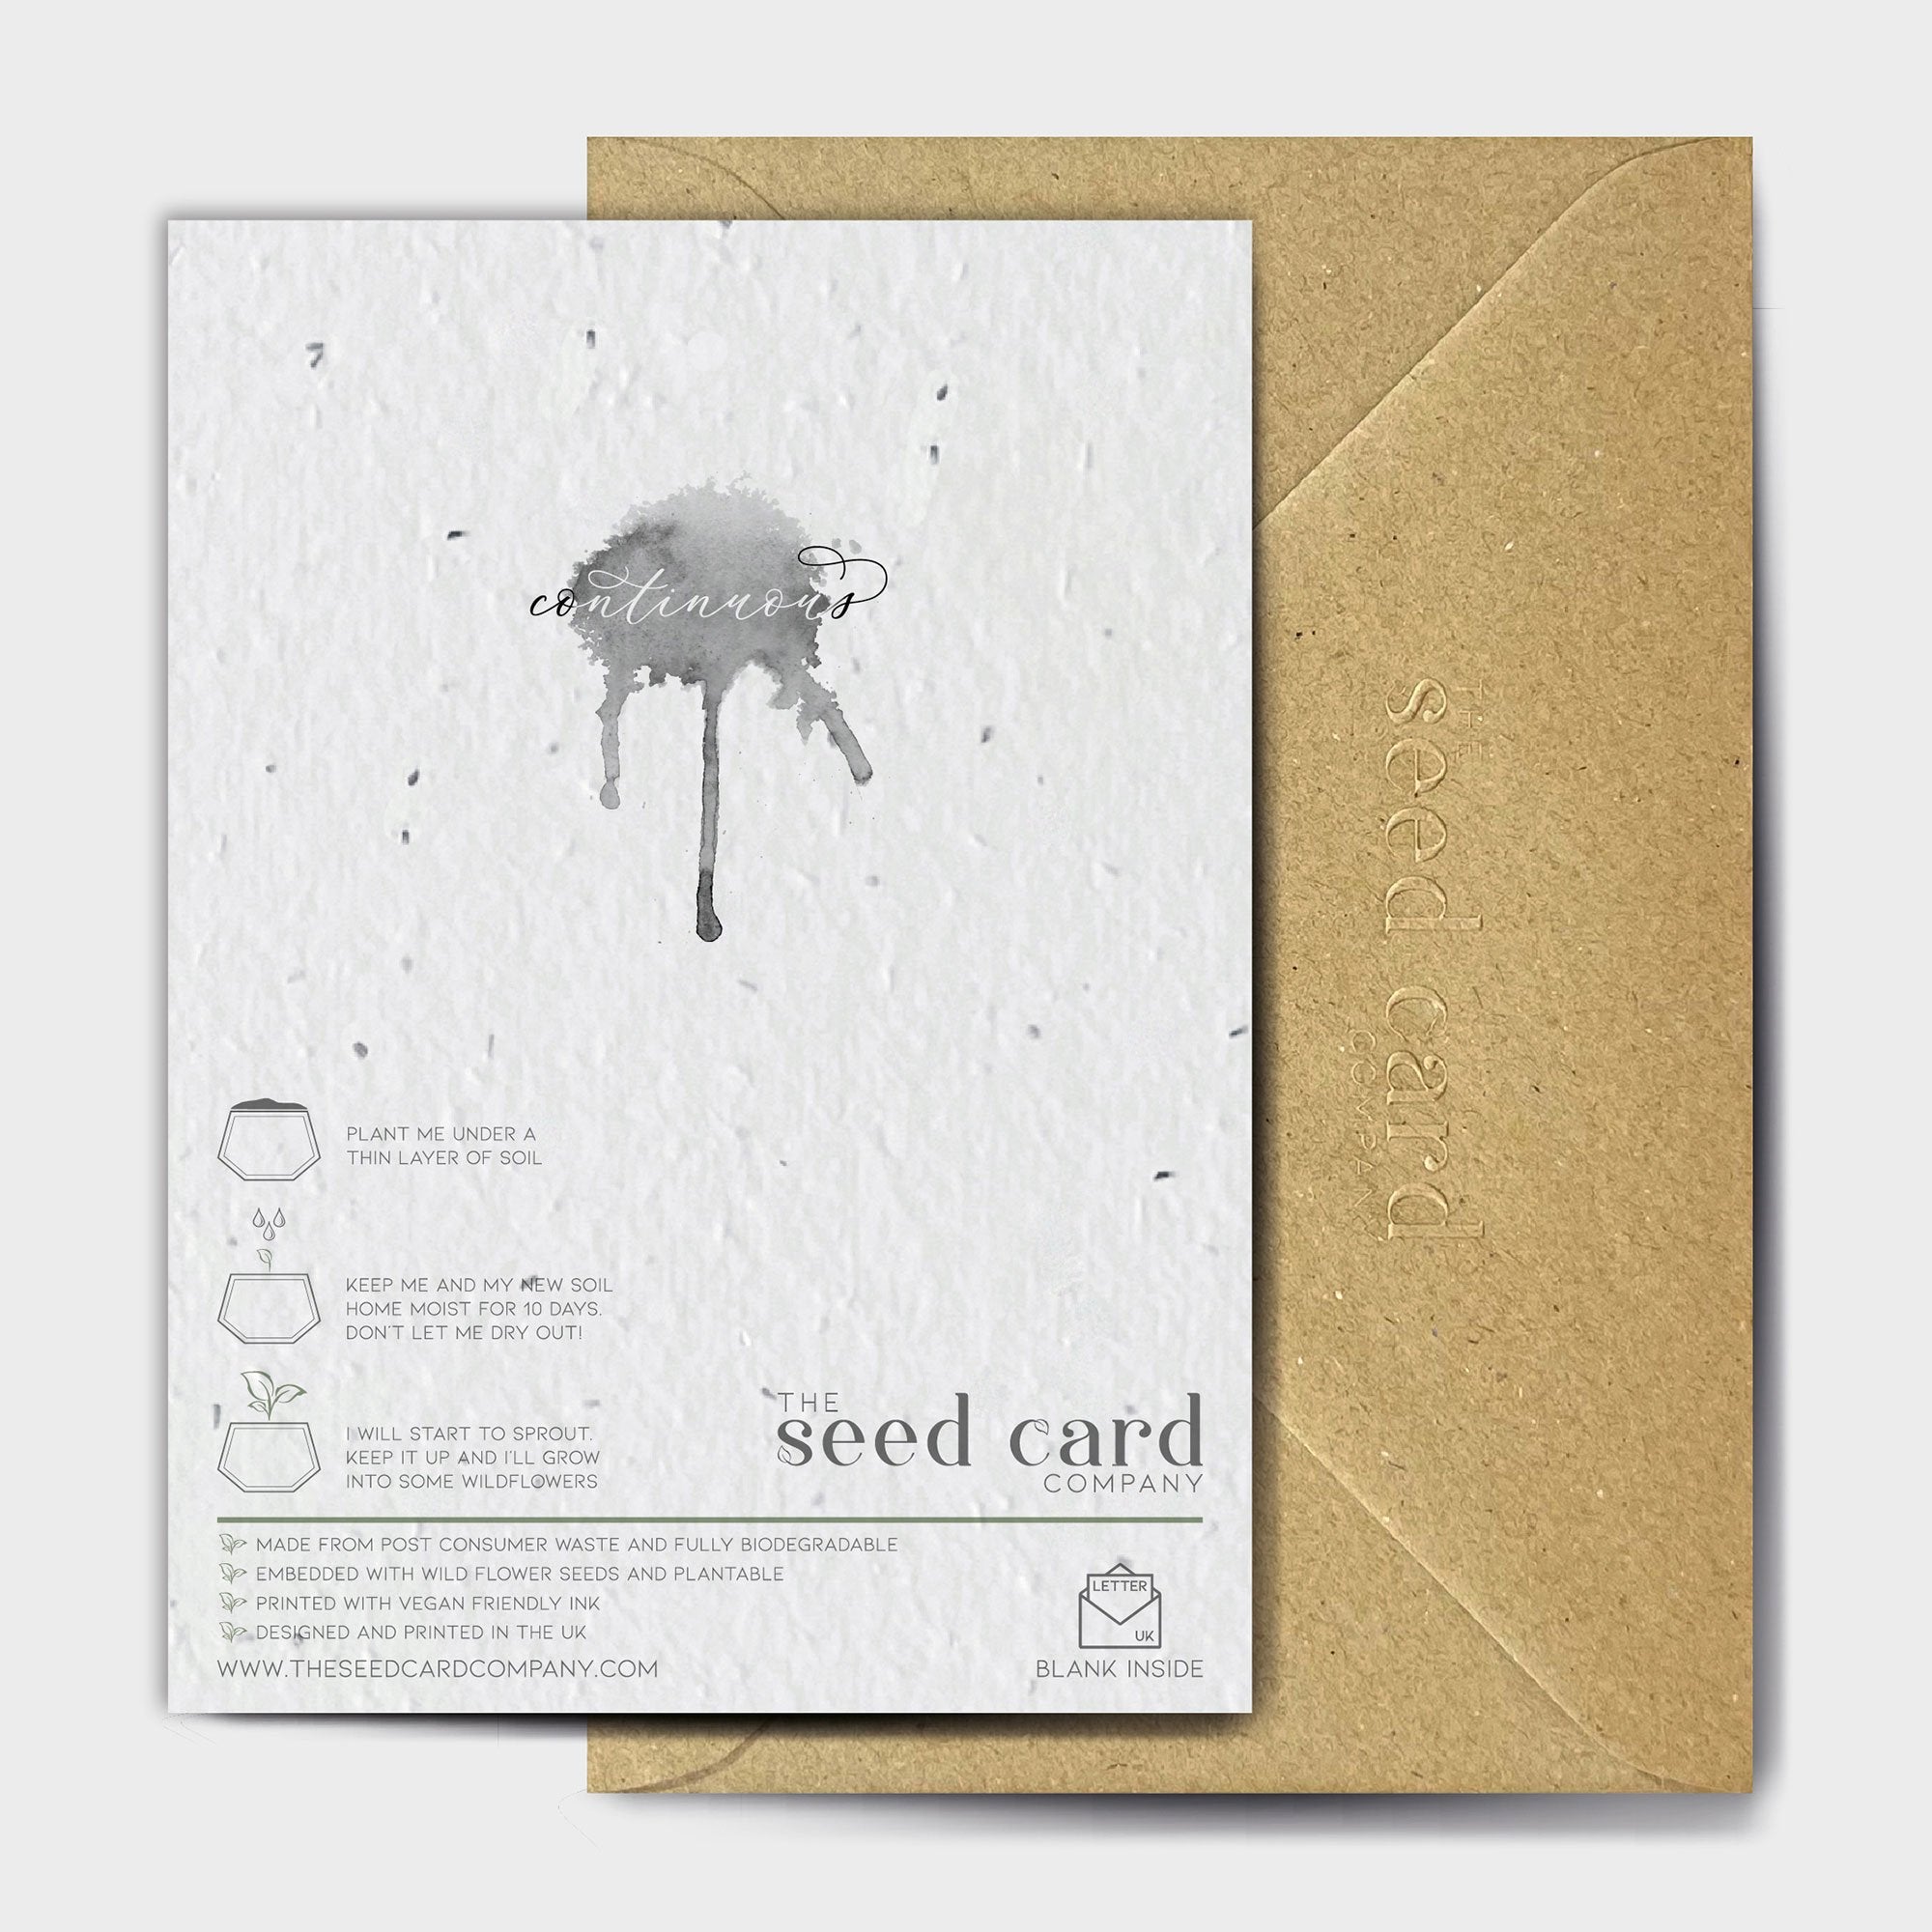 Shop online Pink Anomalily - 100% biodegradable seed-embedded cards Shop -The Seed Card Company